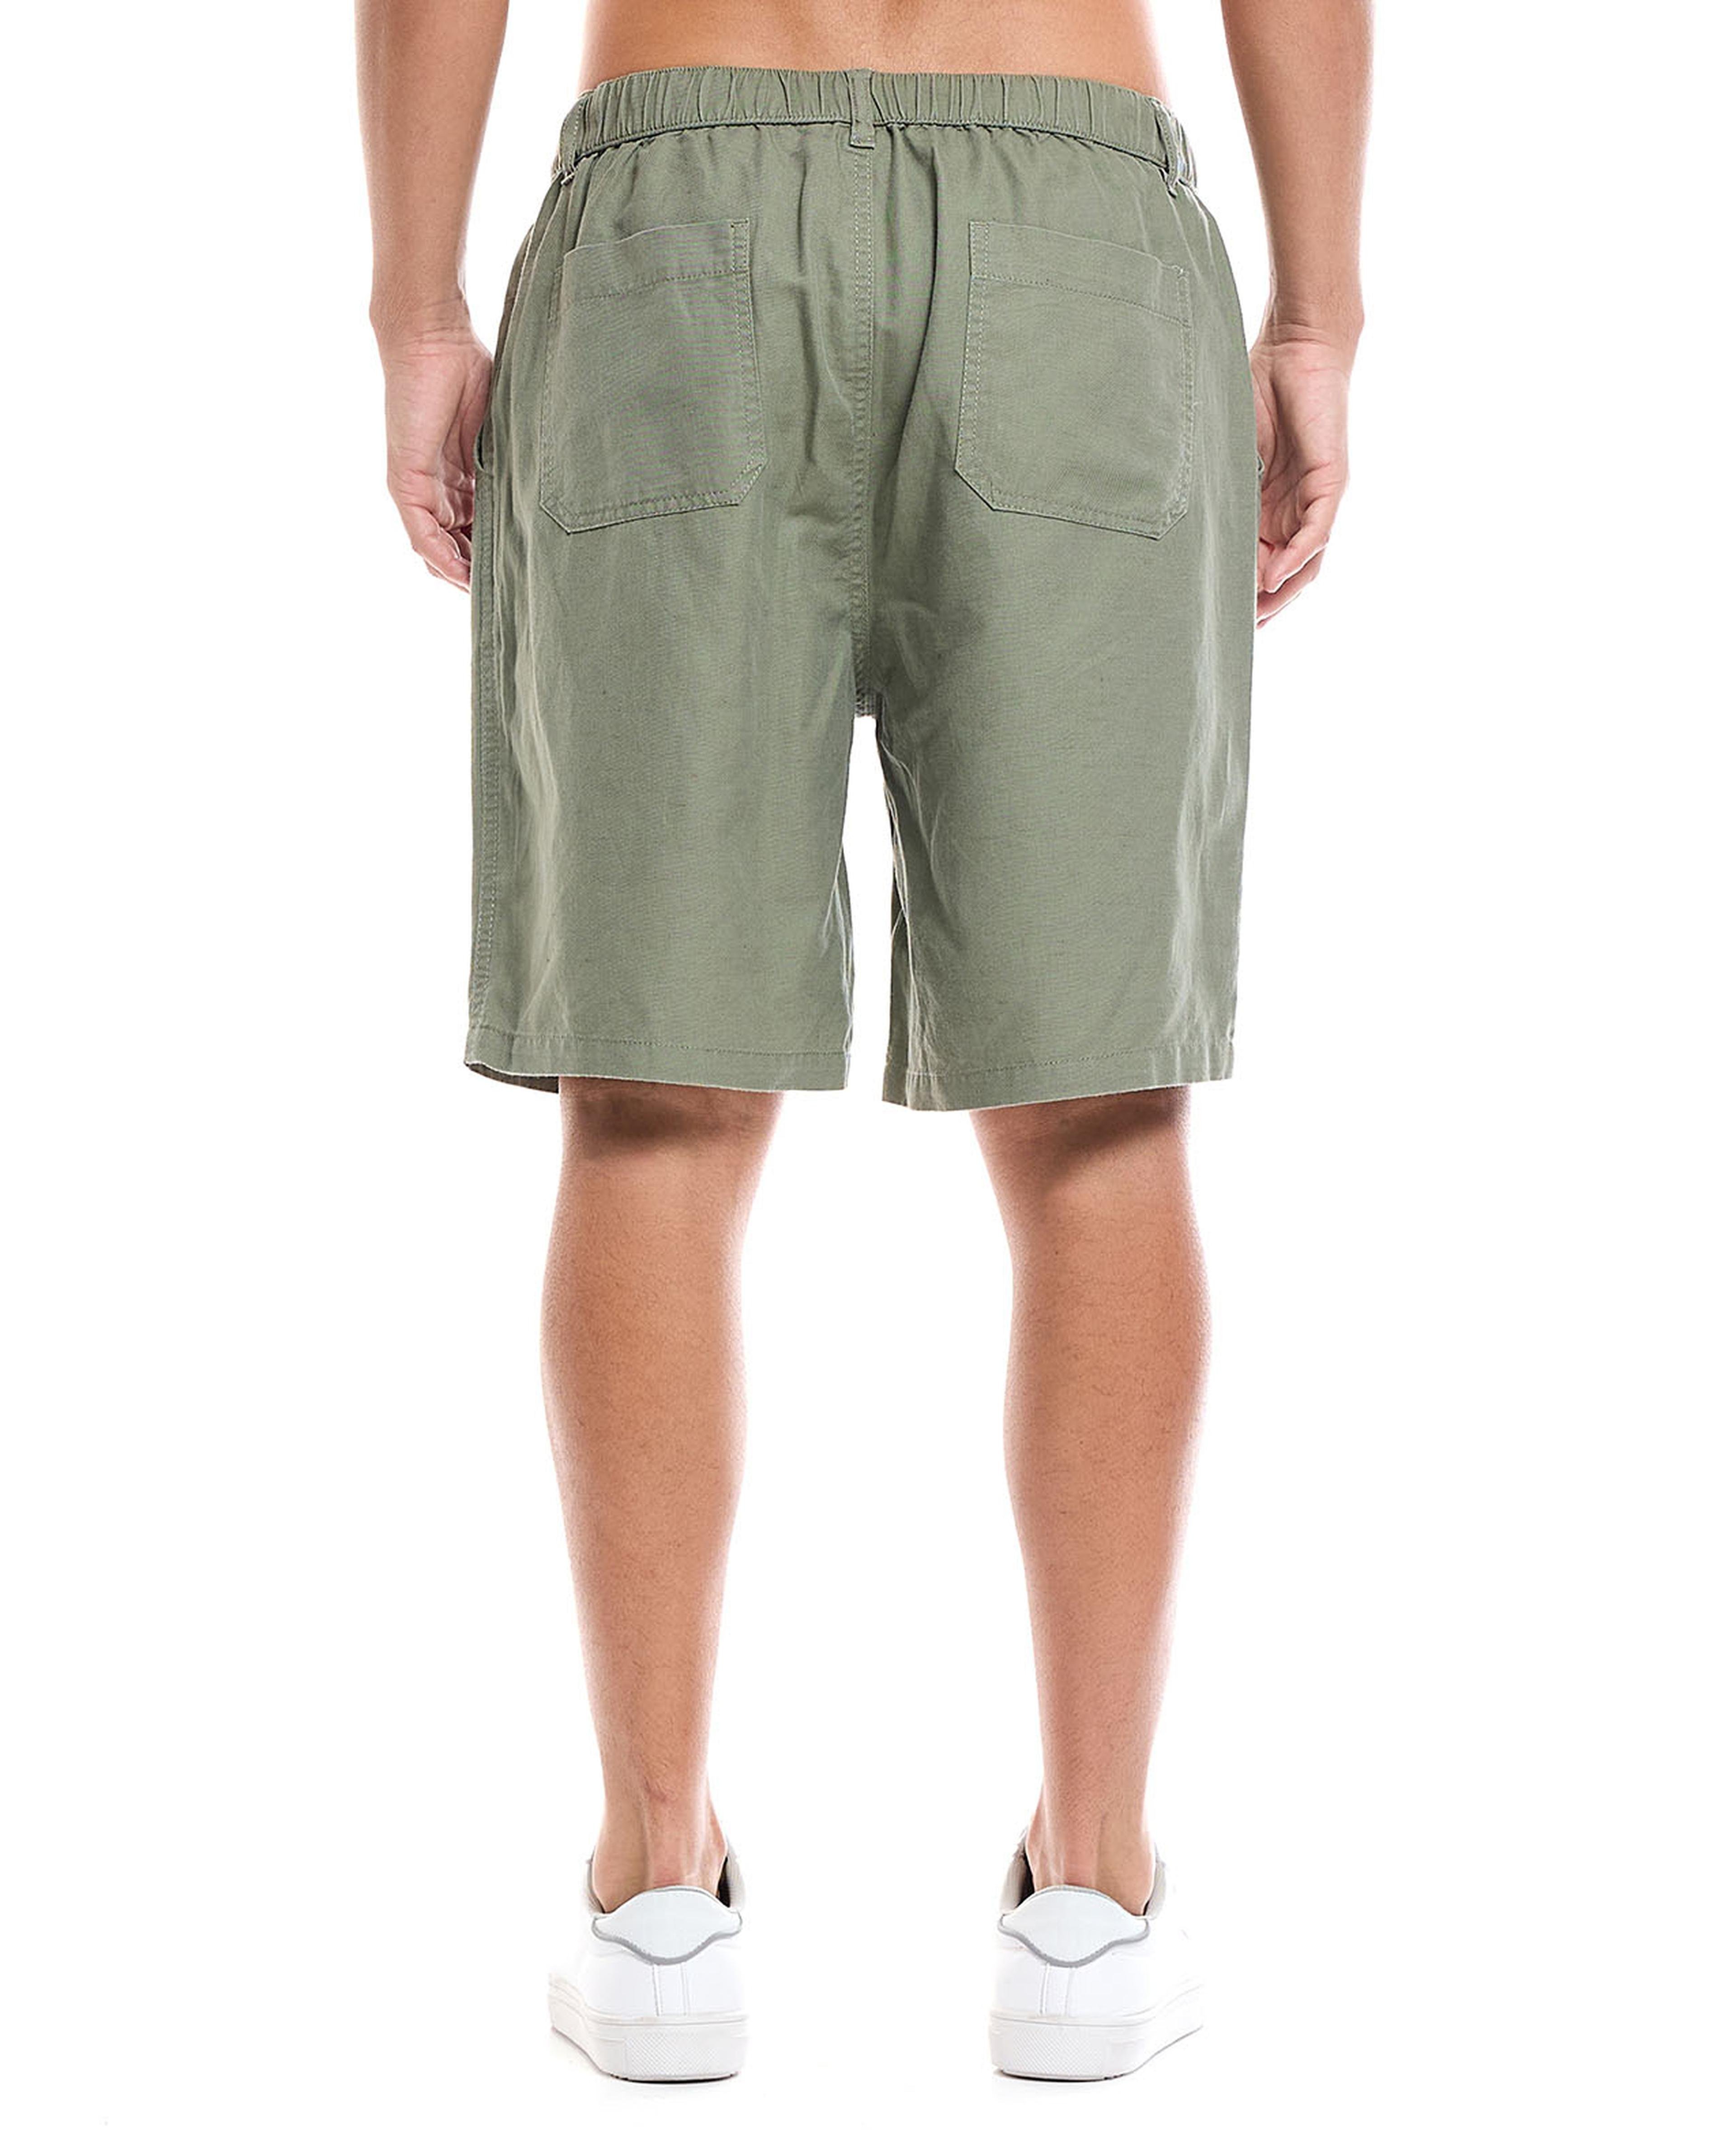 Solid Shorts with Drawstring waist